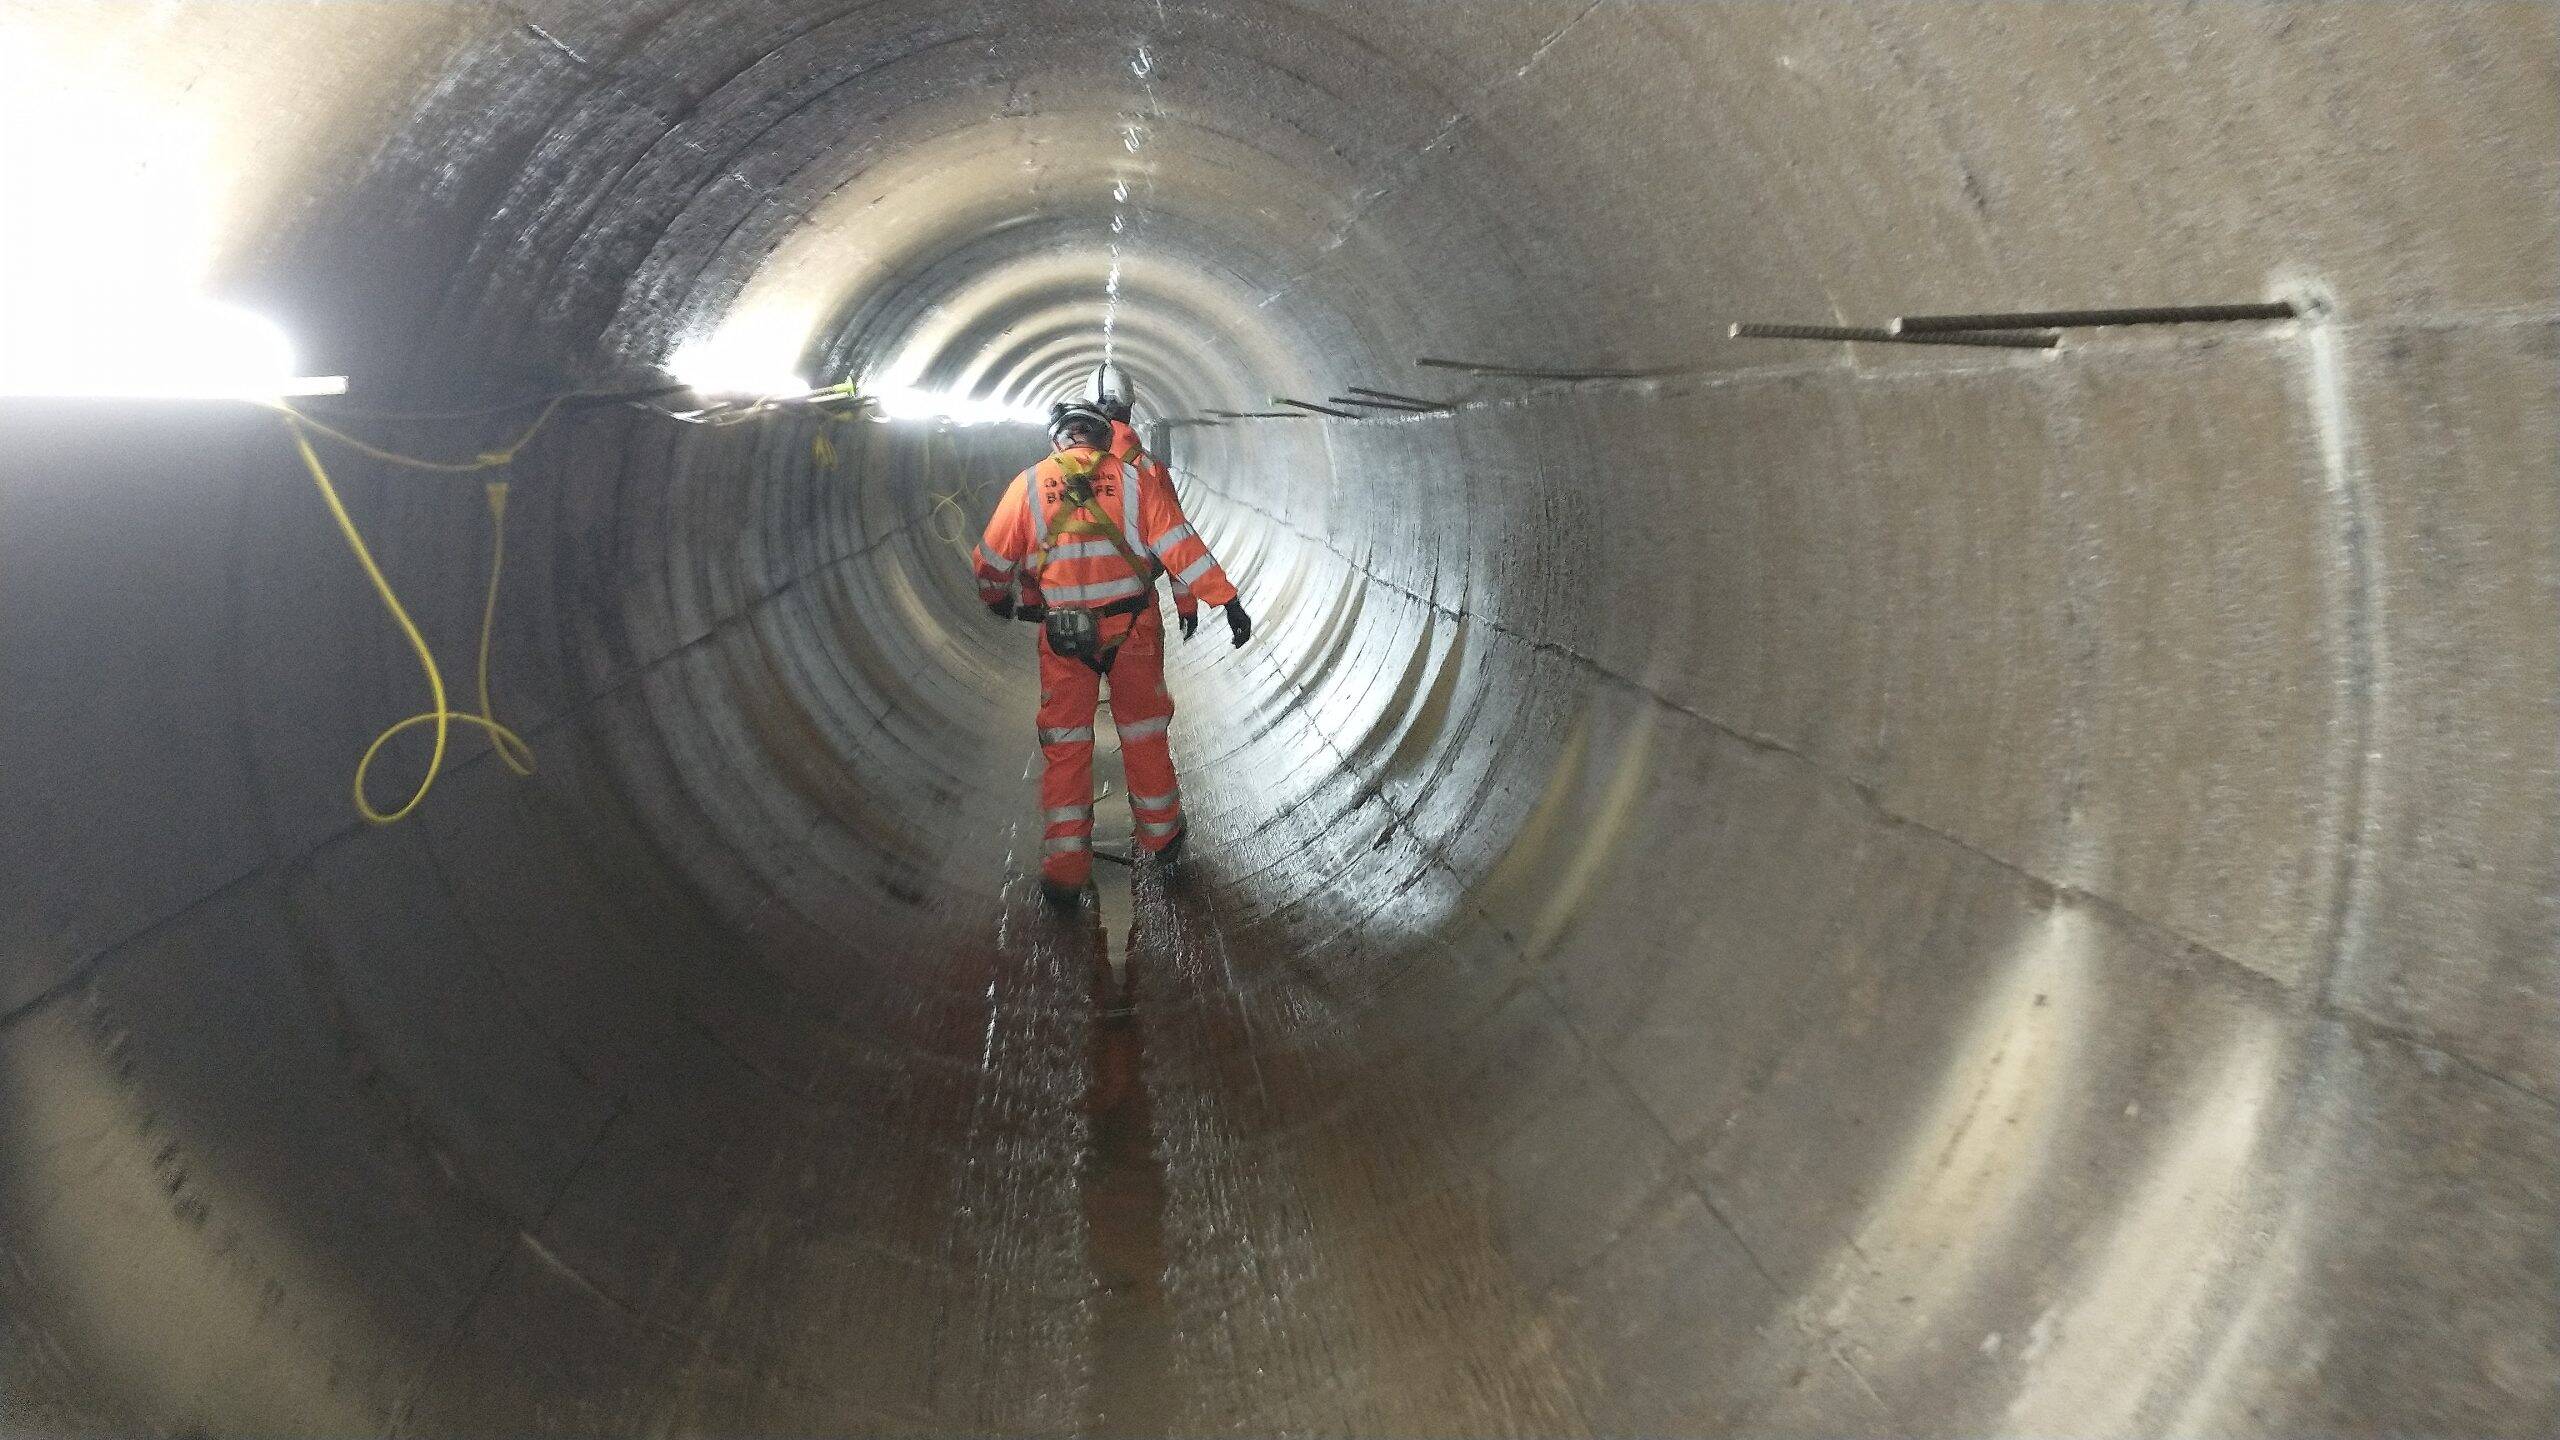 Royal de-commission: Reconfiguring London’s water during a £25m reservoir upgrade